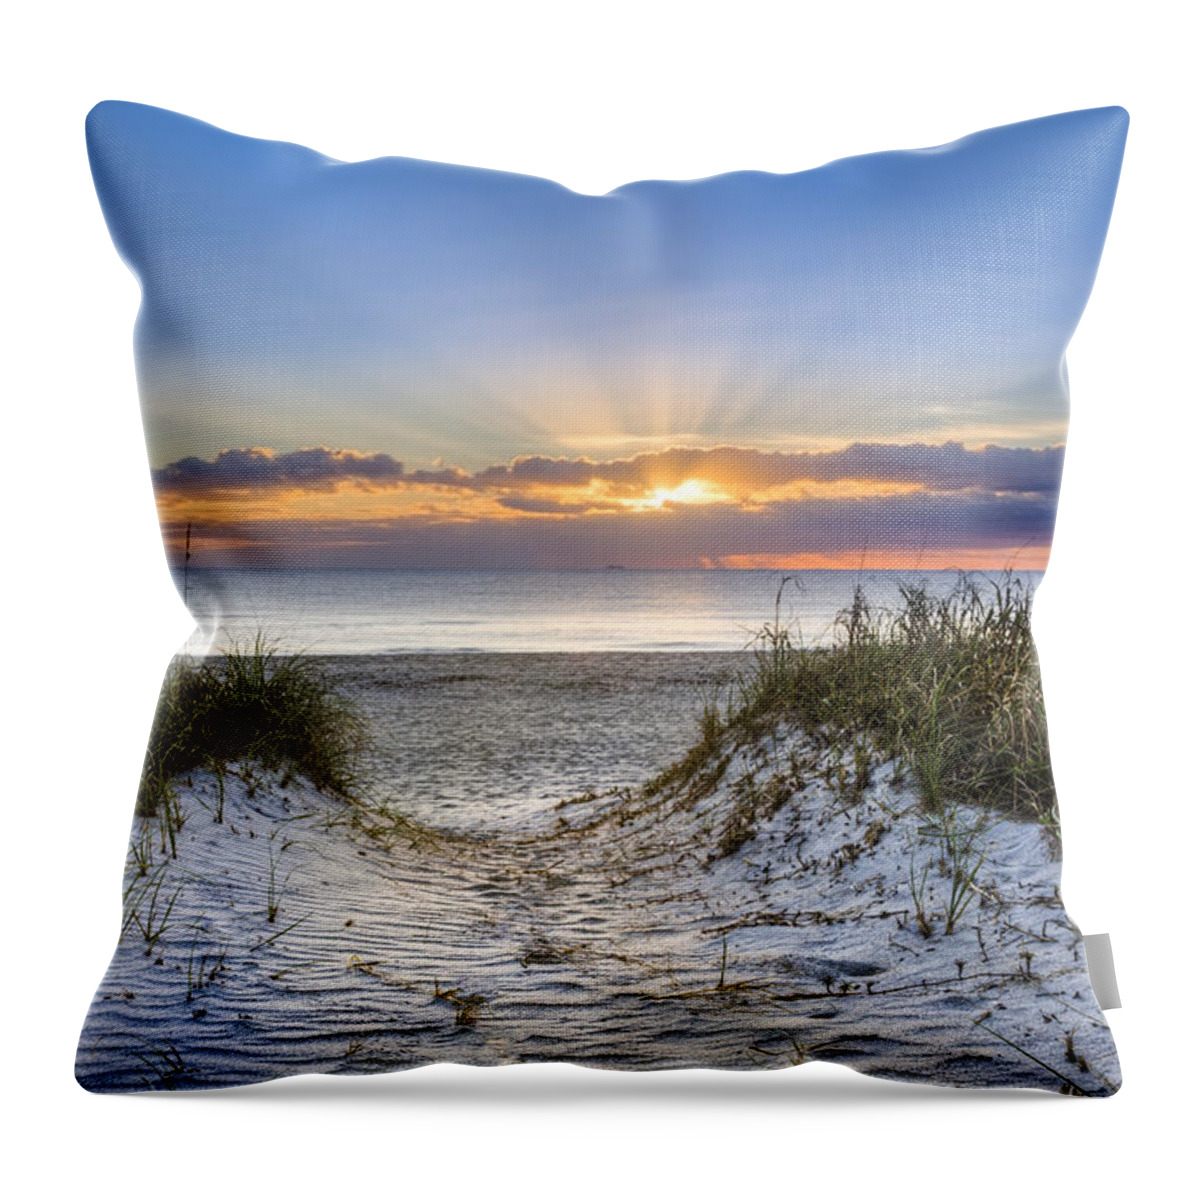 Atlantic Throw Pillow featuring the photograph Morning Blessing by Debra and Dave Vanderlaan